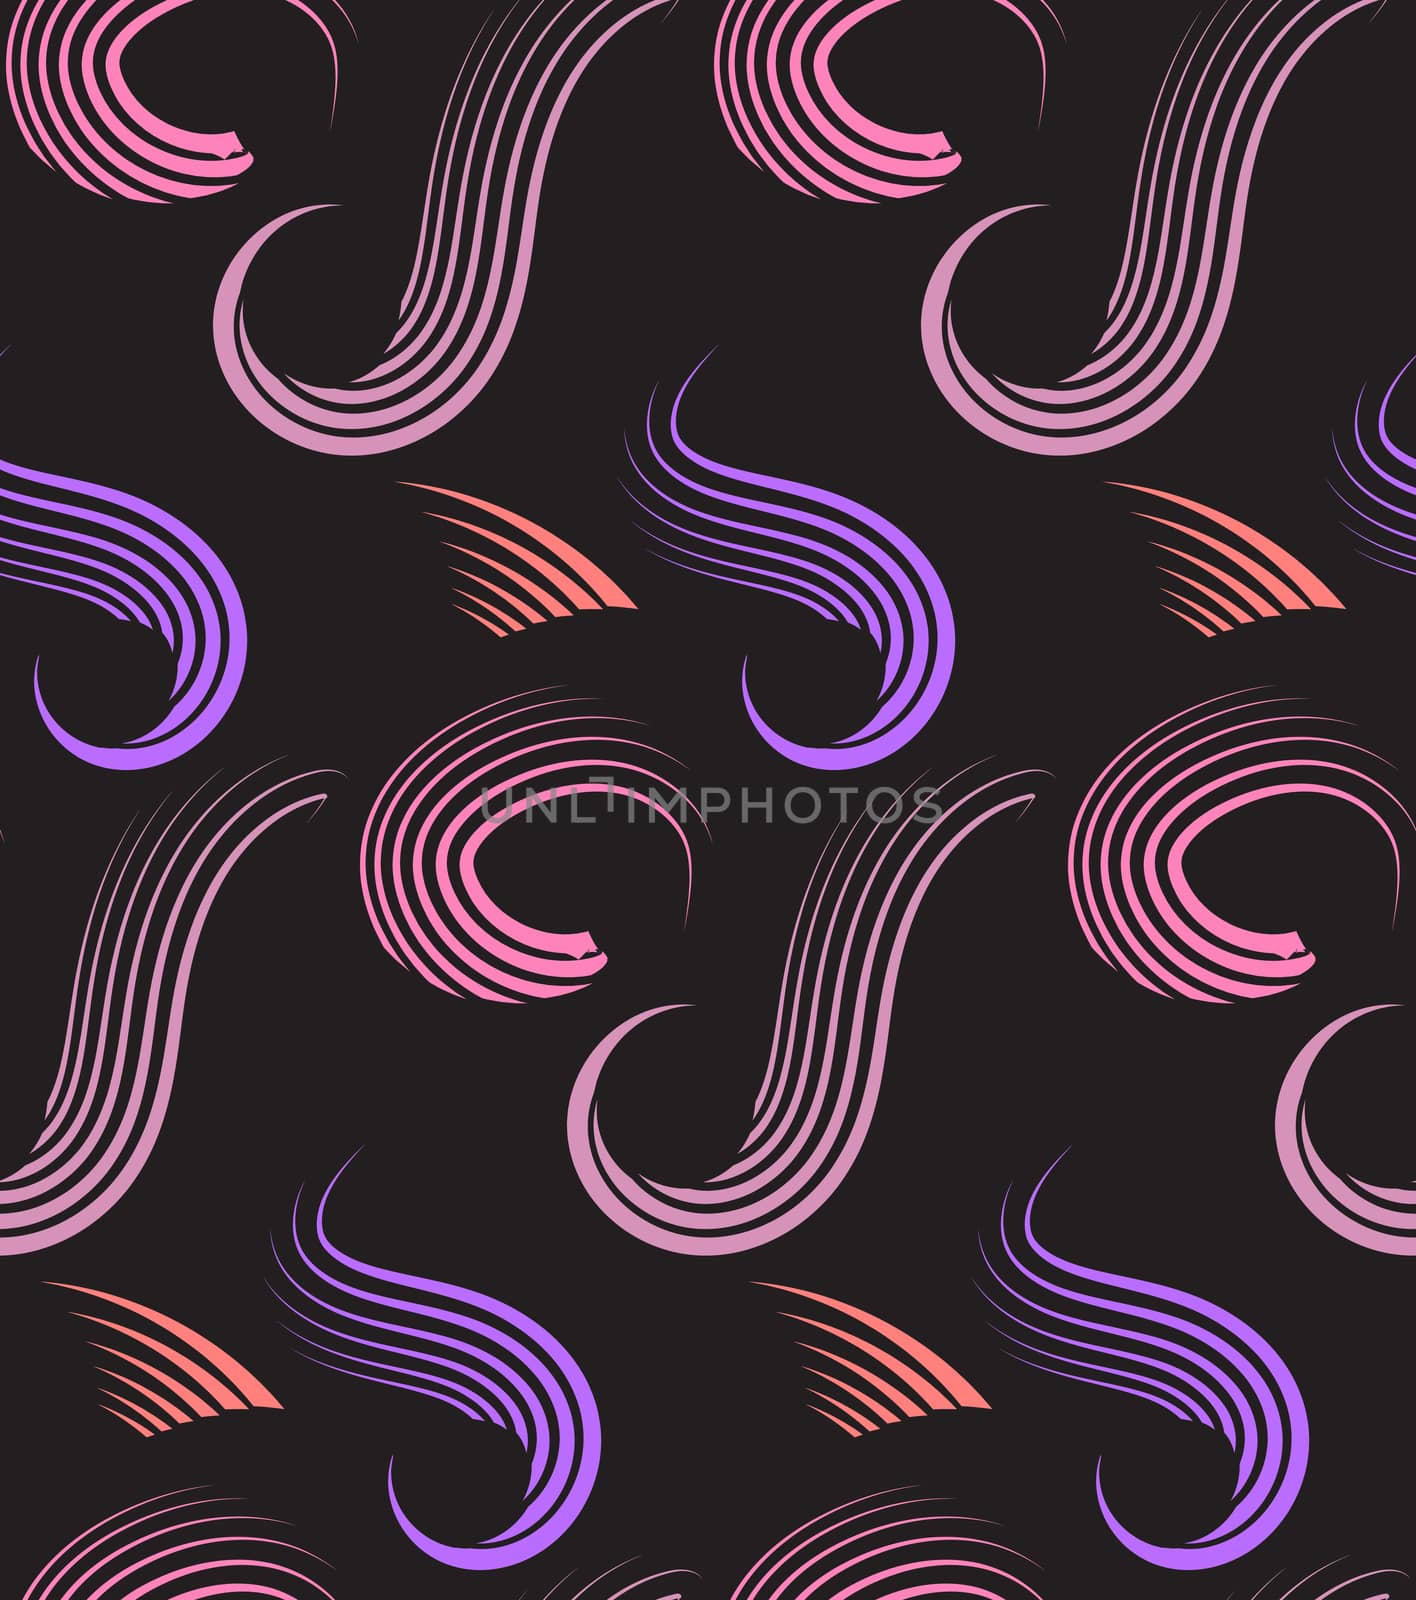 Grunge colorful abstract geometric seamless pattern. Vector